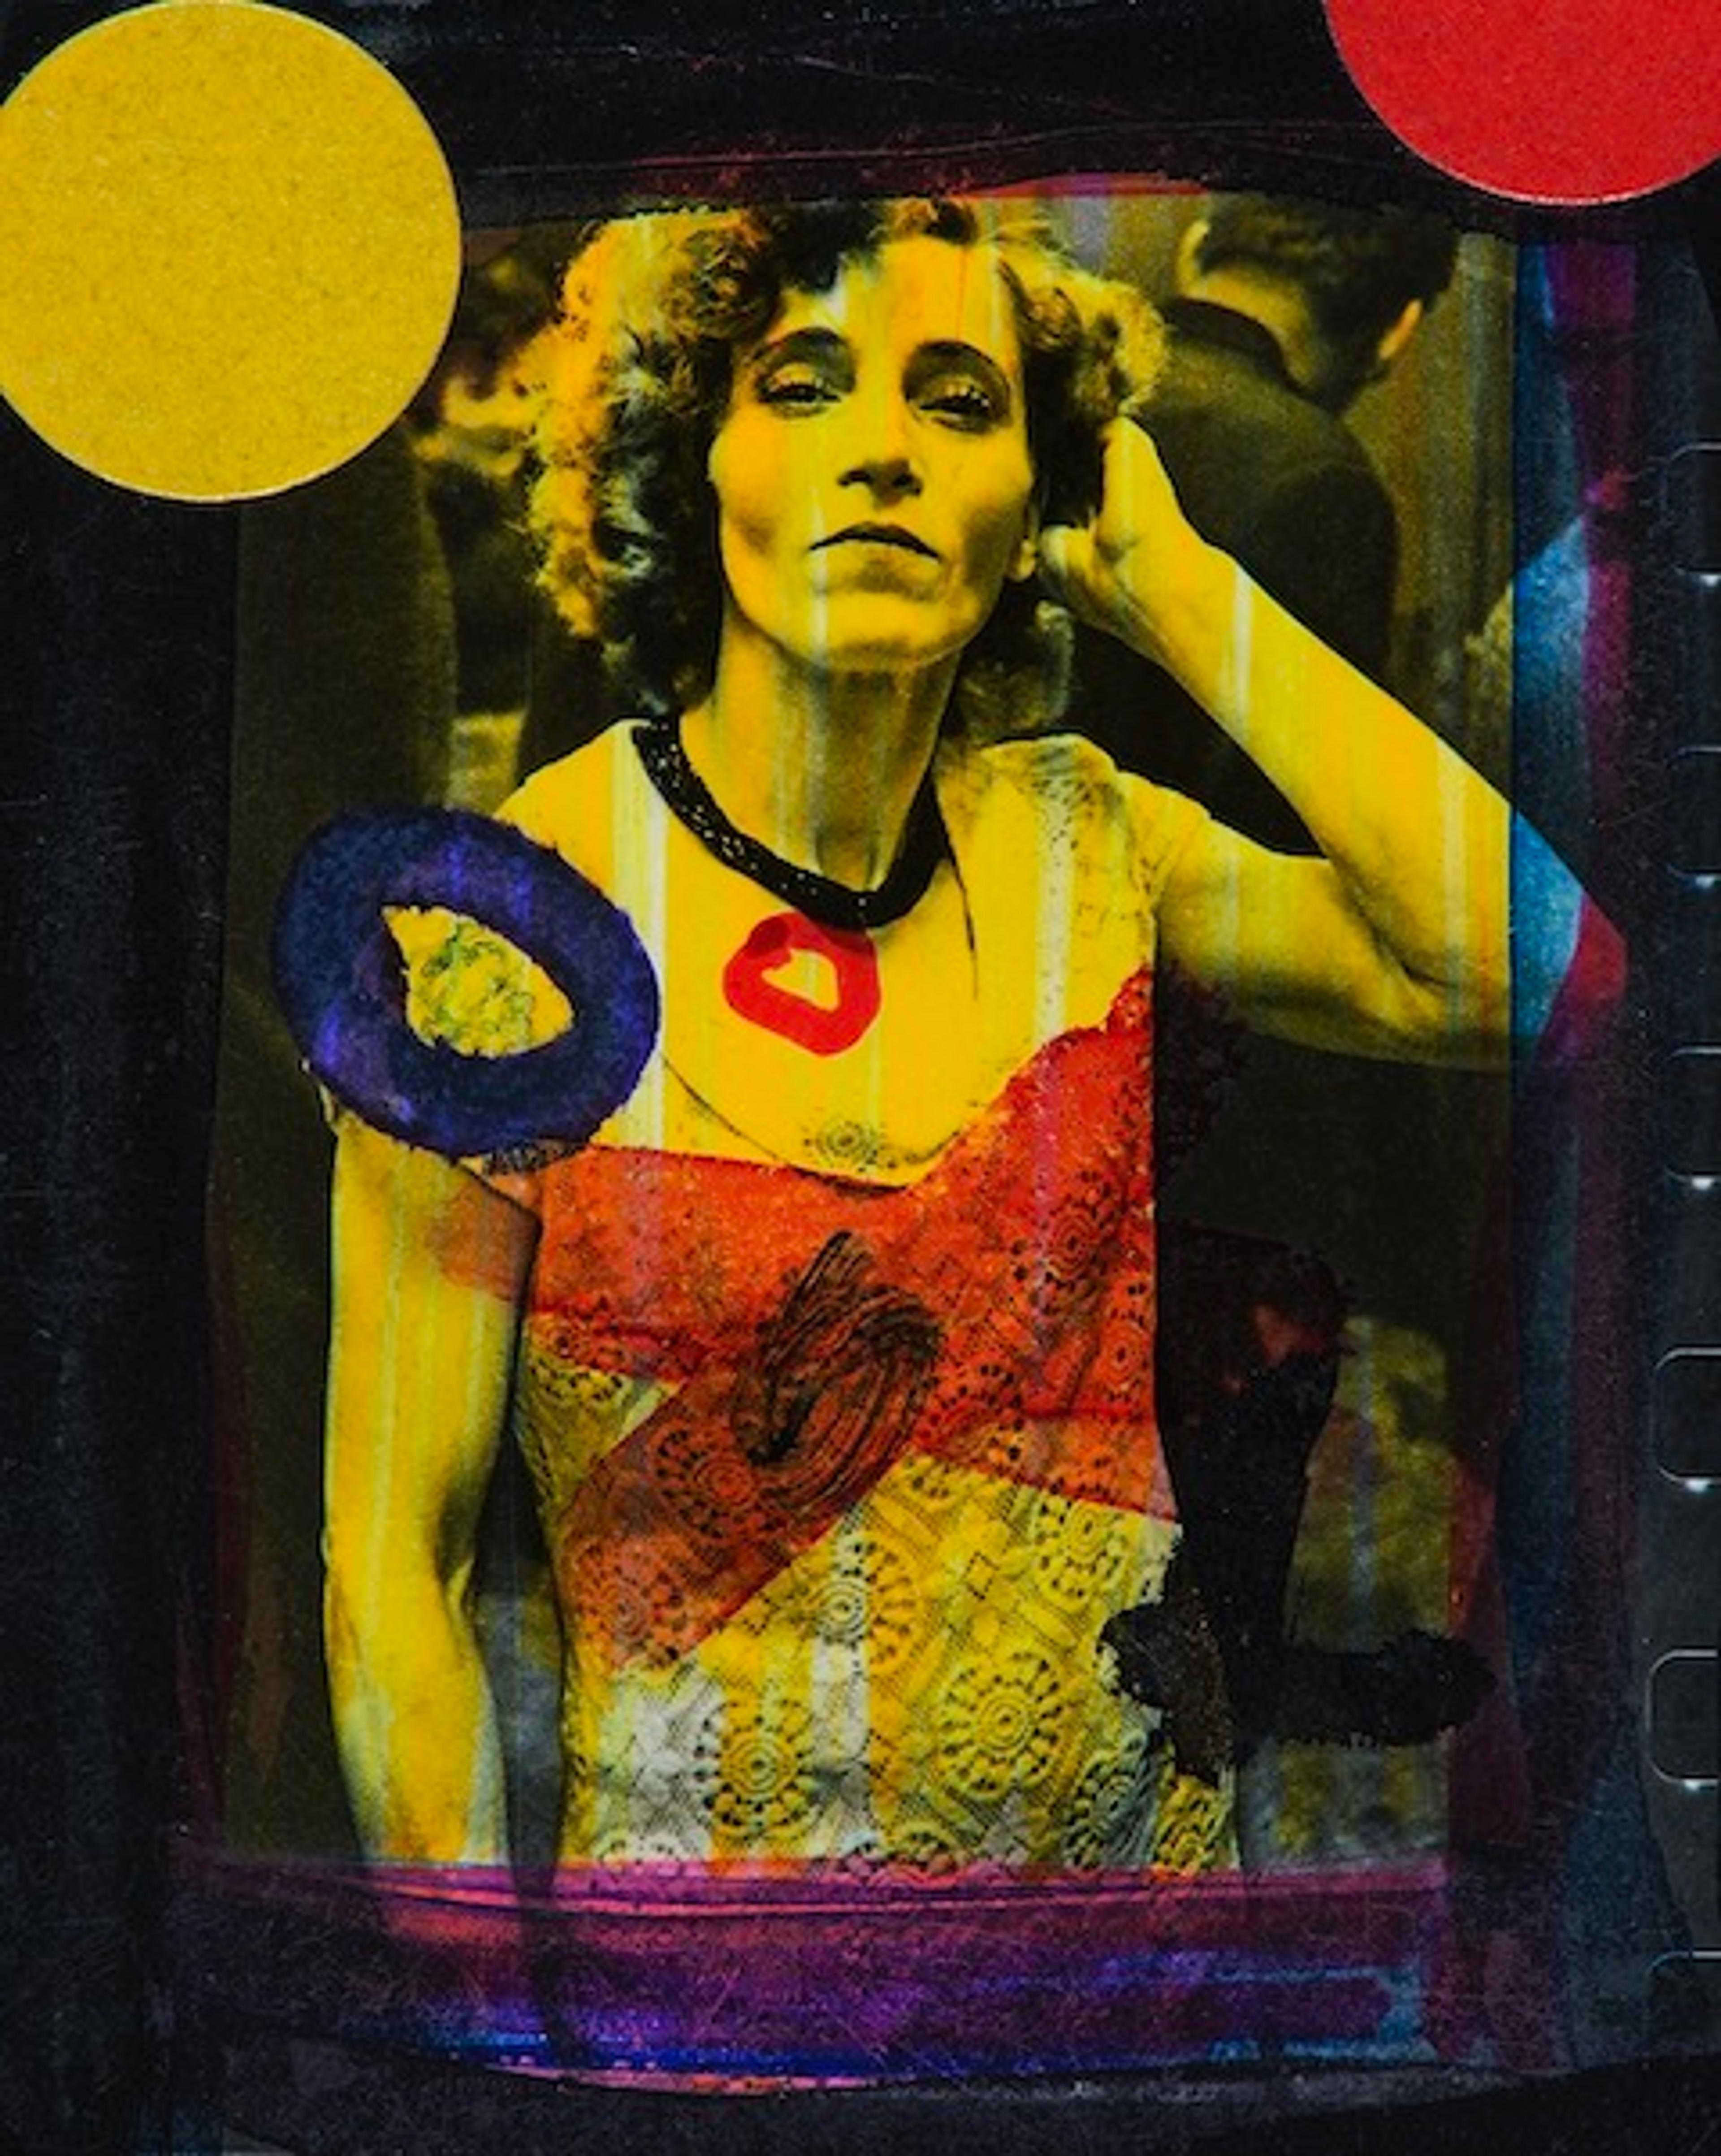 A colorful photographic artwork of a woman with short curly hair with her hand to her ear